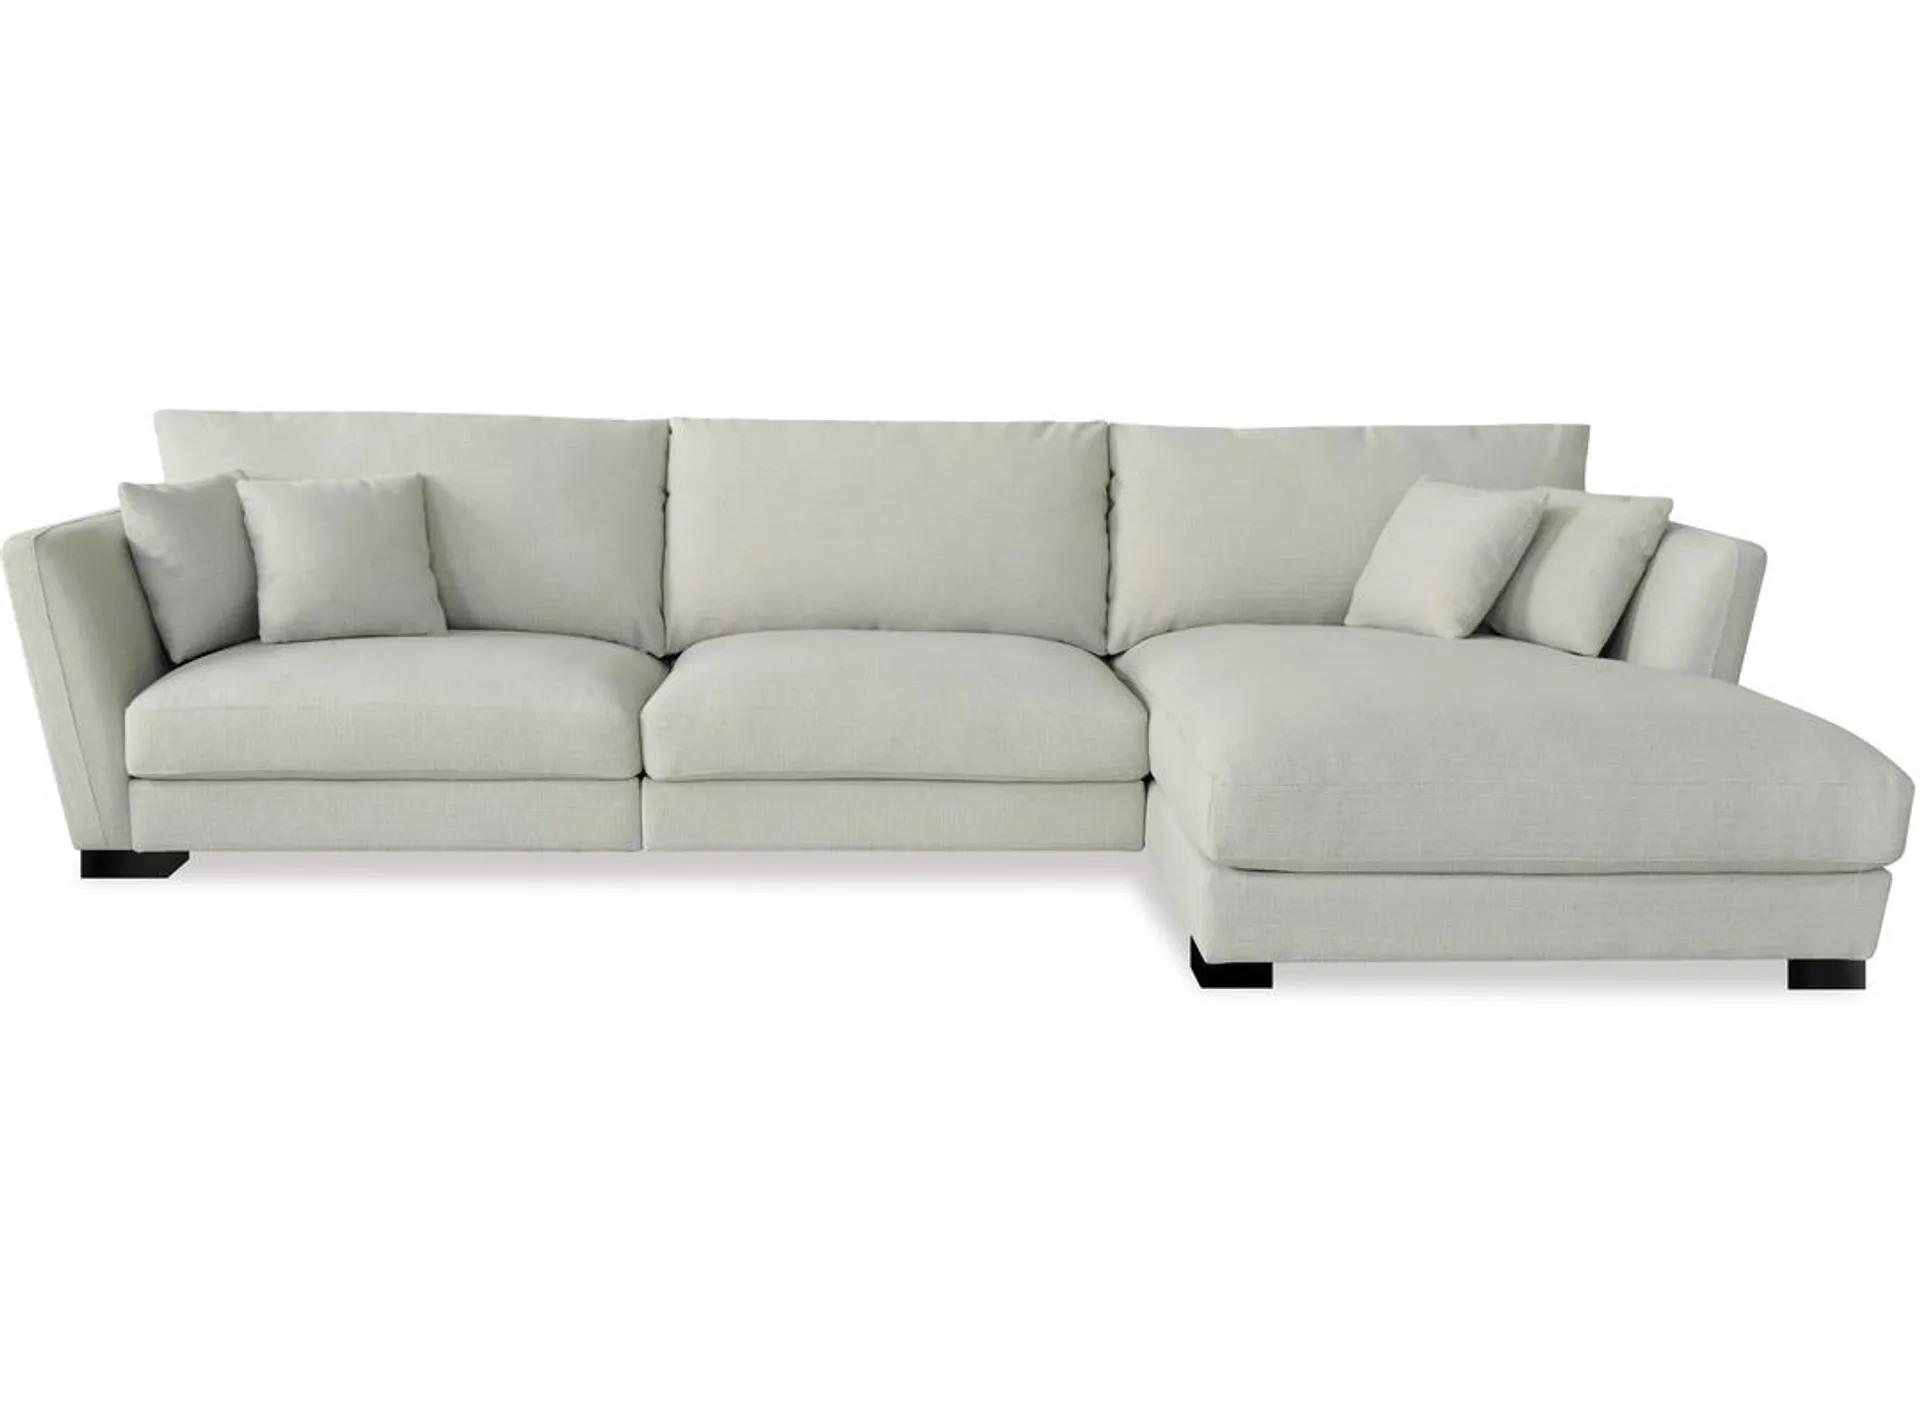 Lopez 3 Seater Chaise Lounge Suite RHF